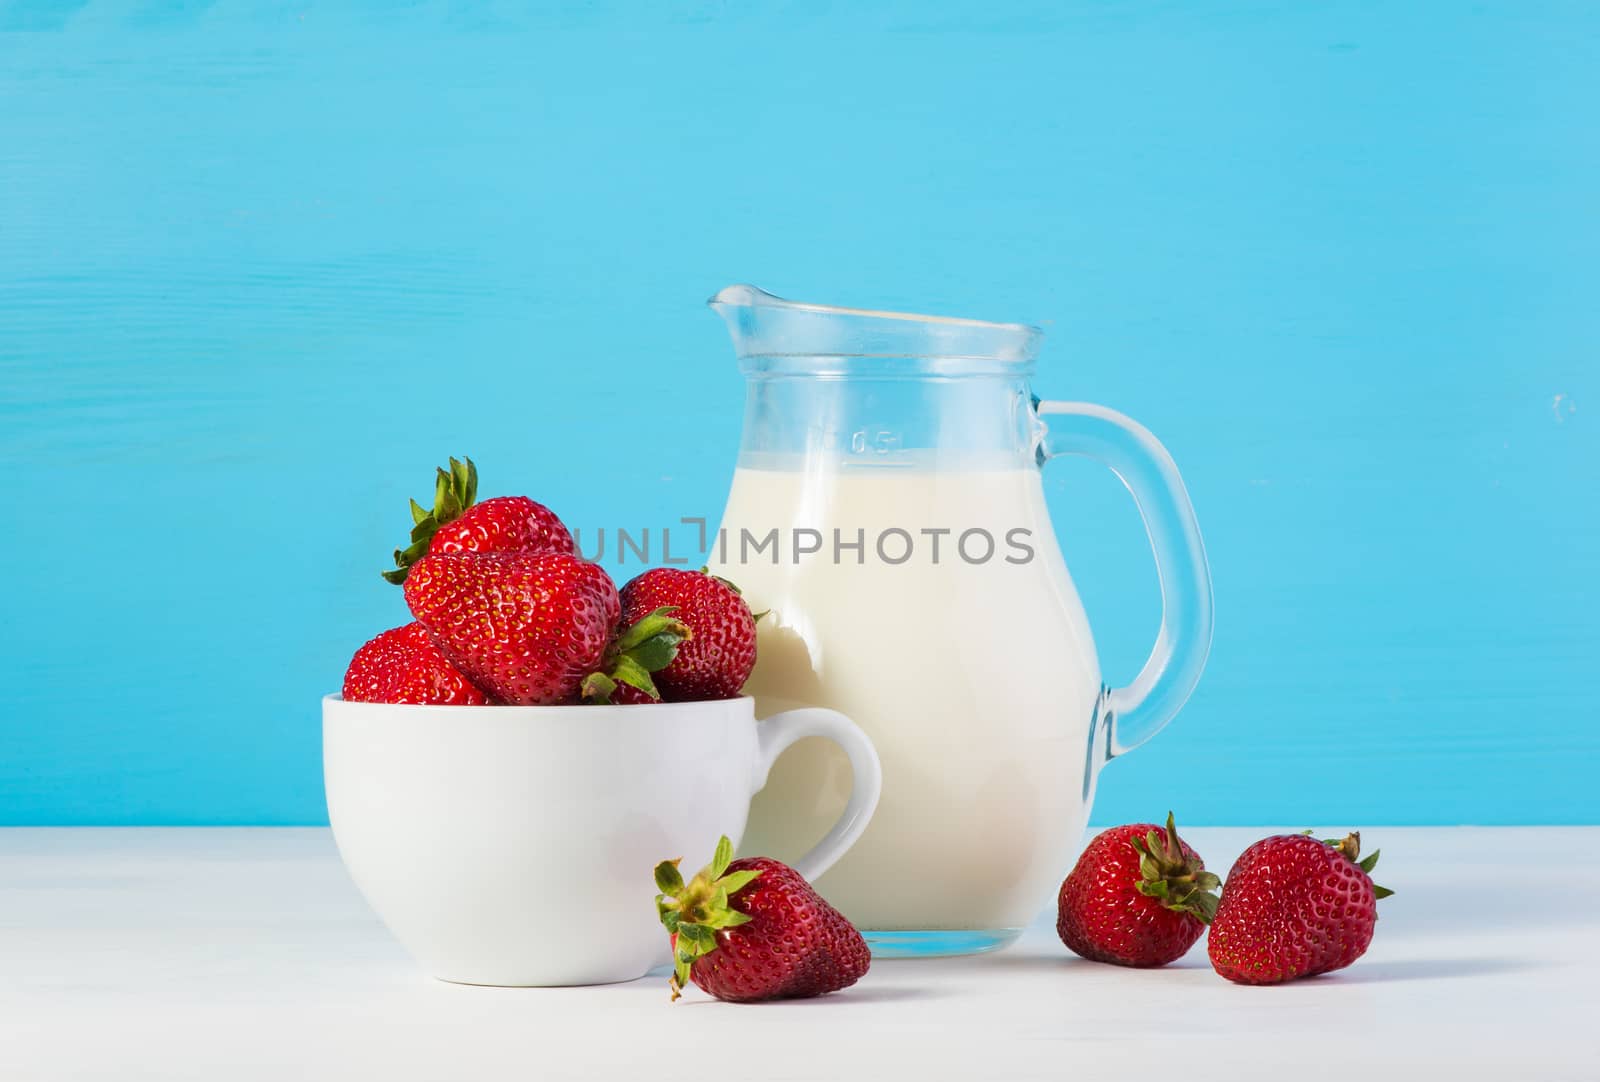 ingredients for strawberry milkshake: rustic fresh milk in a glass jar and raw ripe fresh strawberries in a white cup on a white wooden table on a blue background